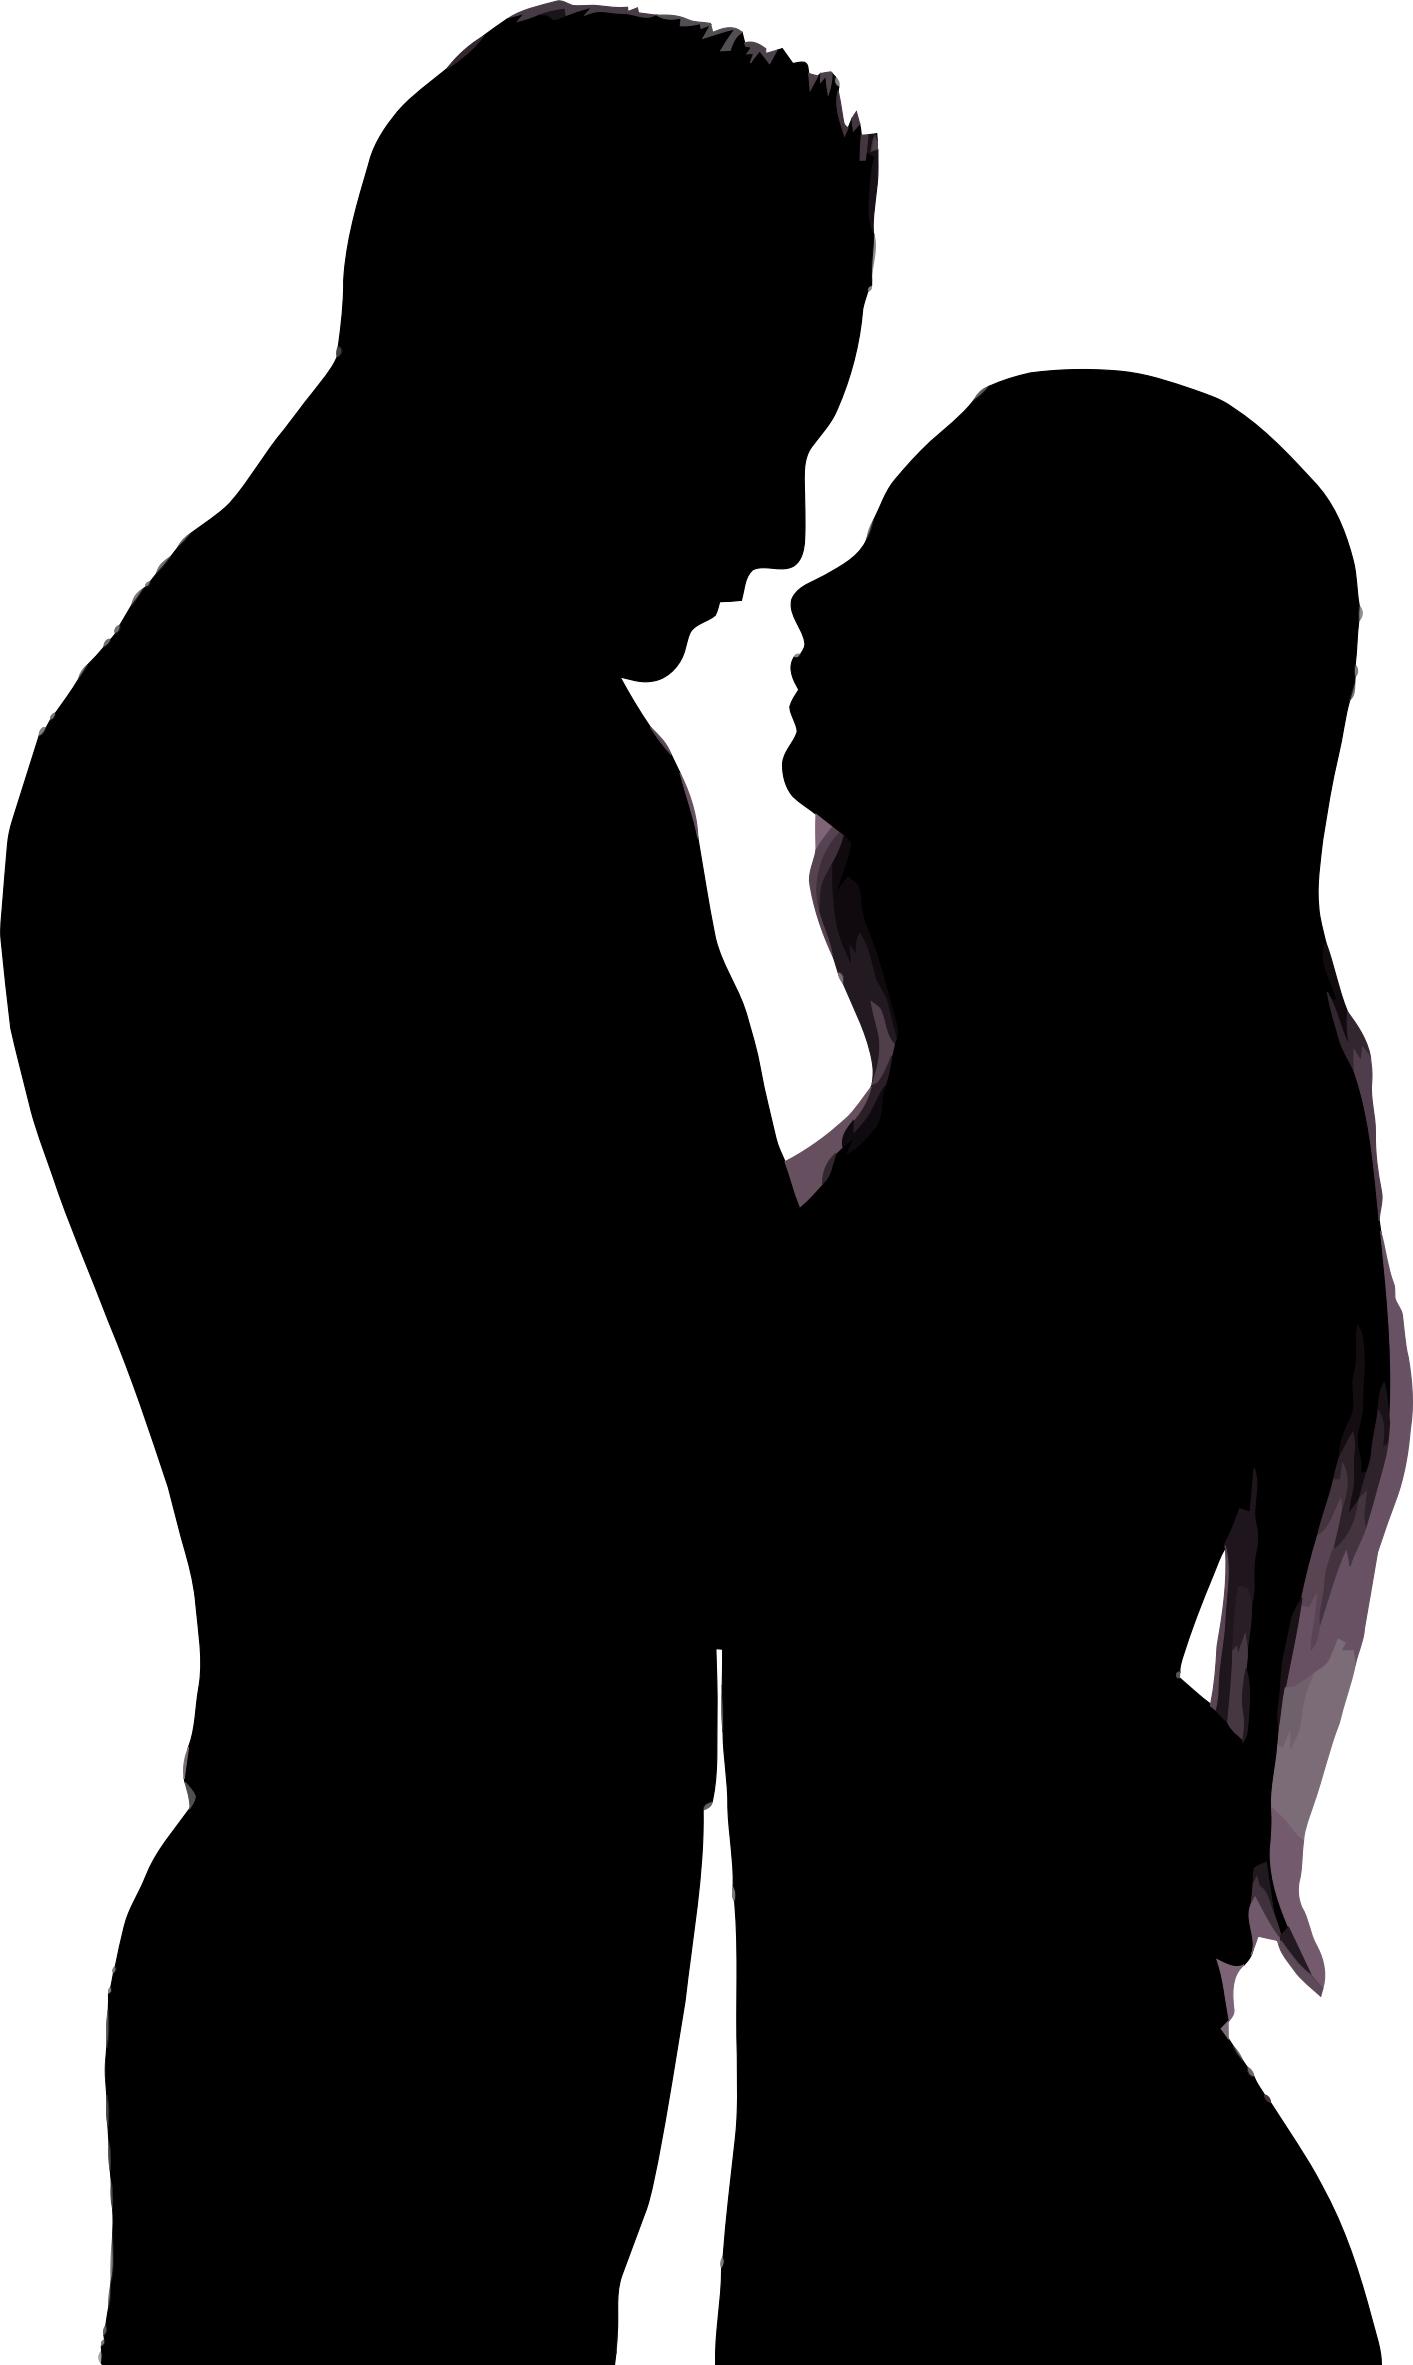 Embracing Couple Silhouette png